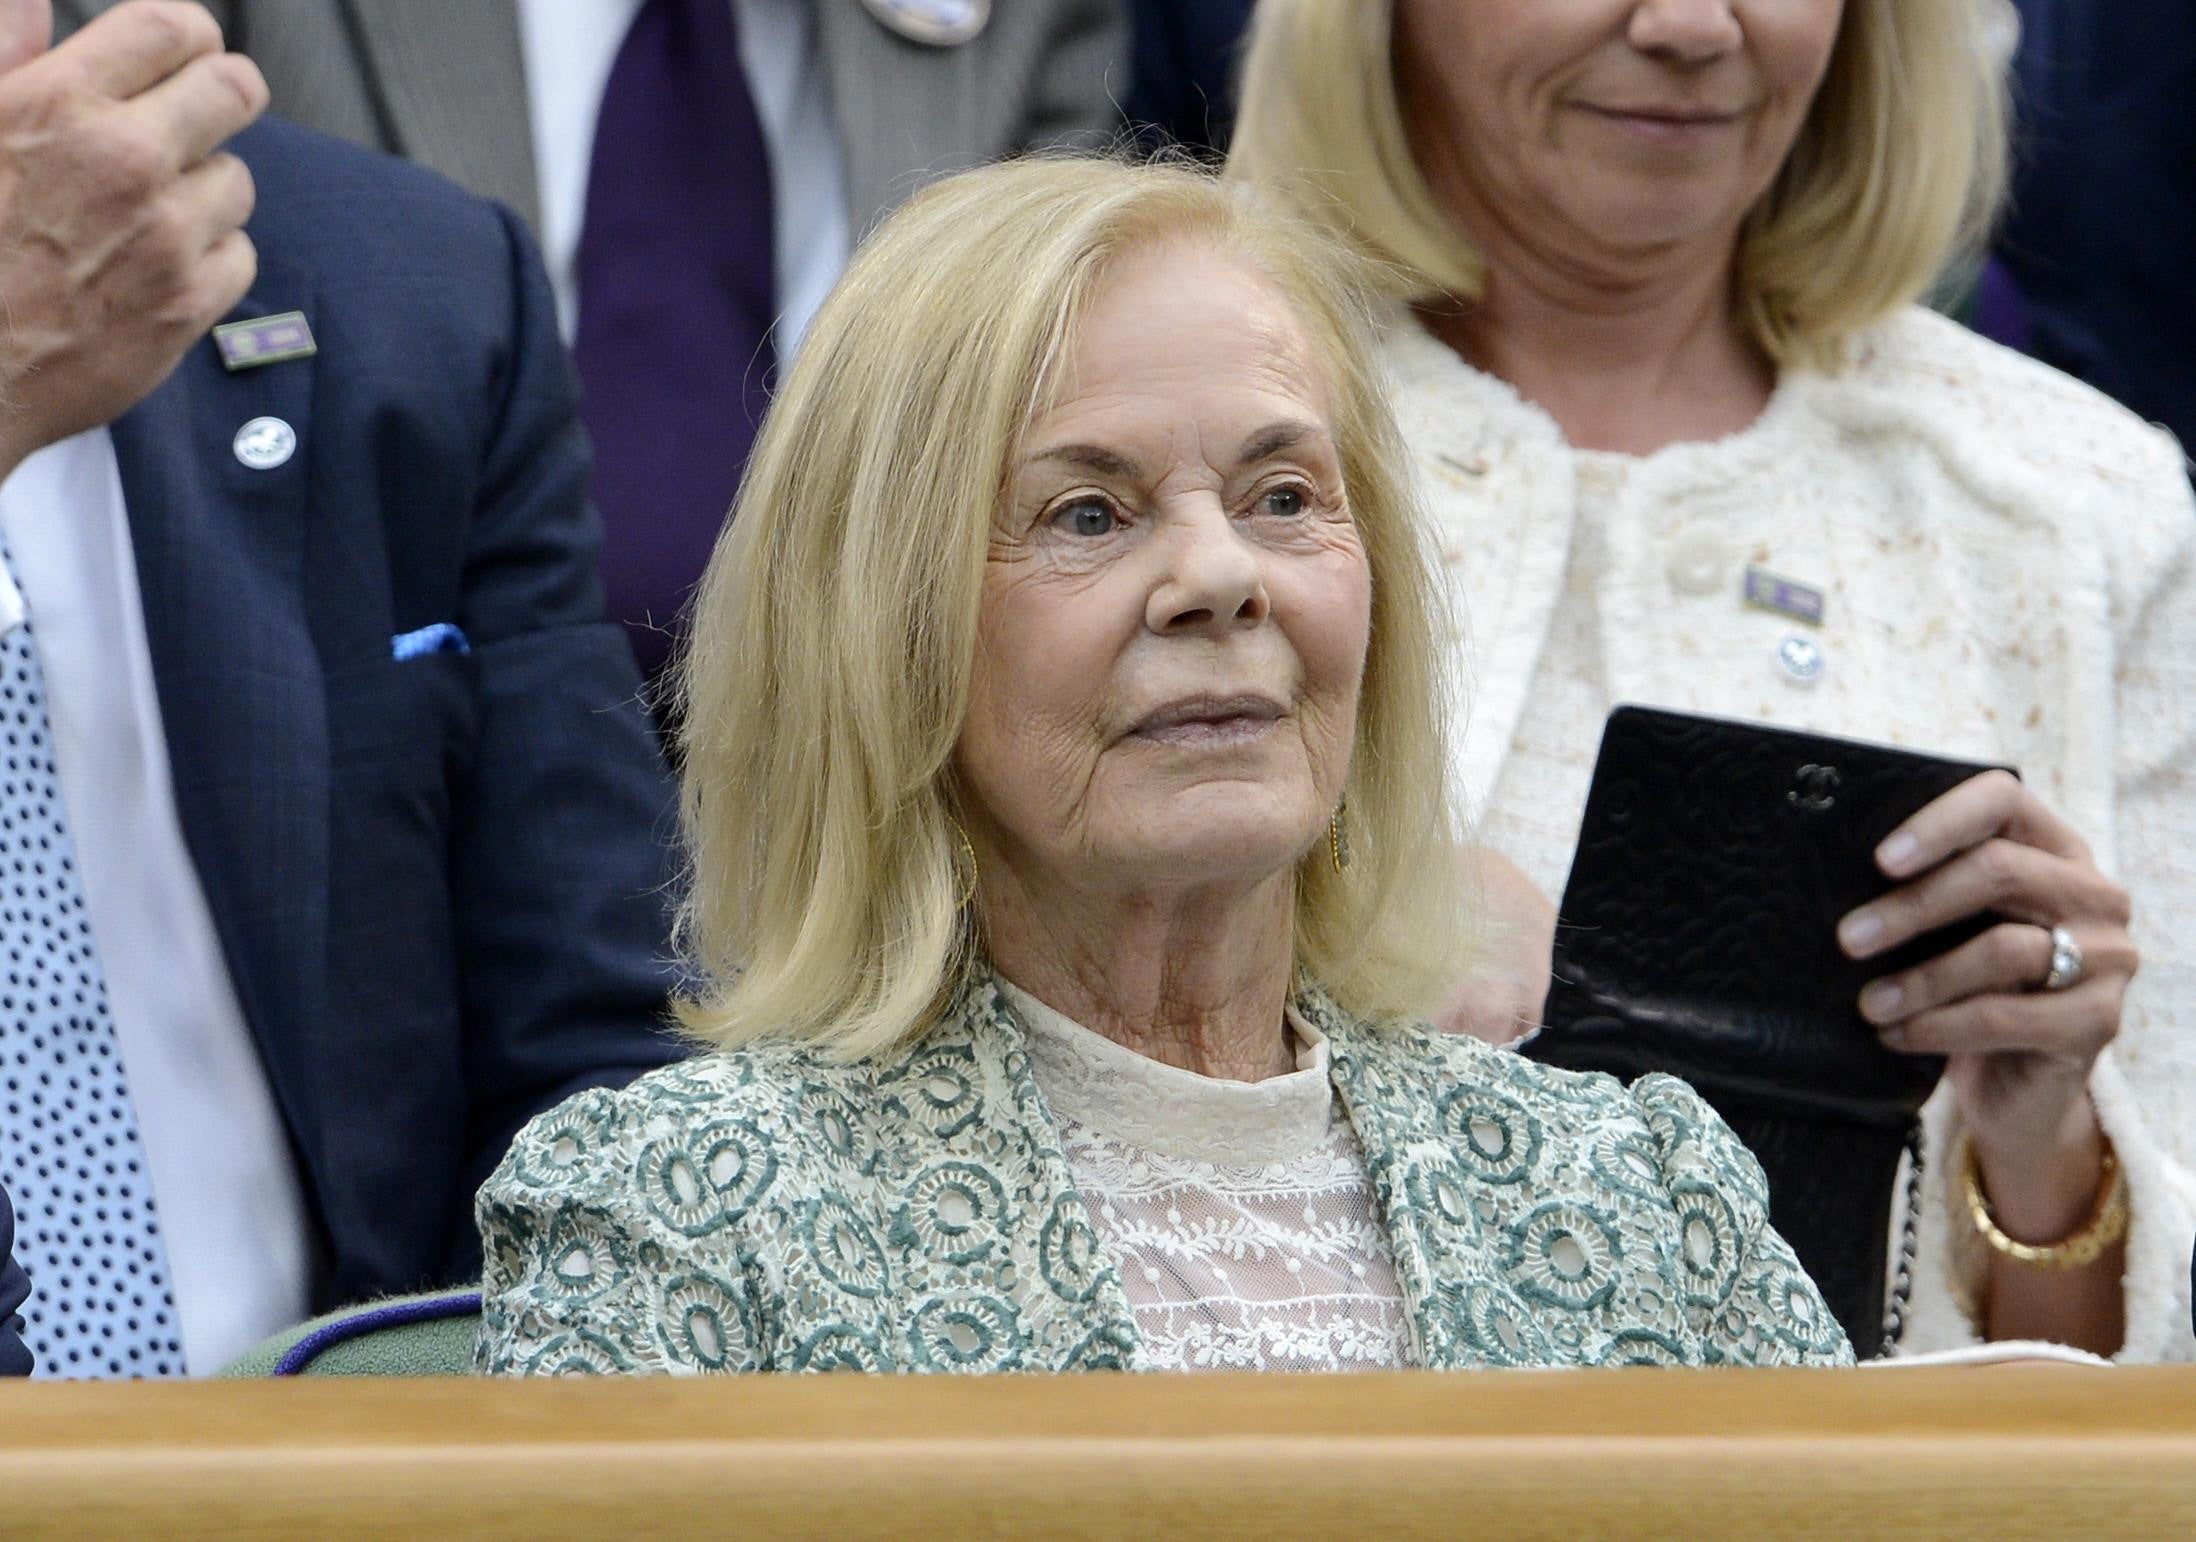 The Duchess of Kent has revealed her fondness for rap music, with Eminem and Ice Cube among her favourite artists in the genre (Rebecca Naden/PA)